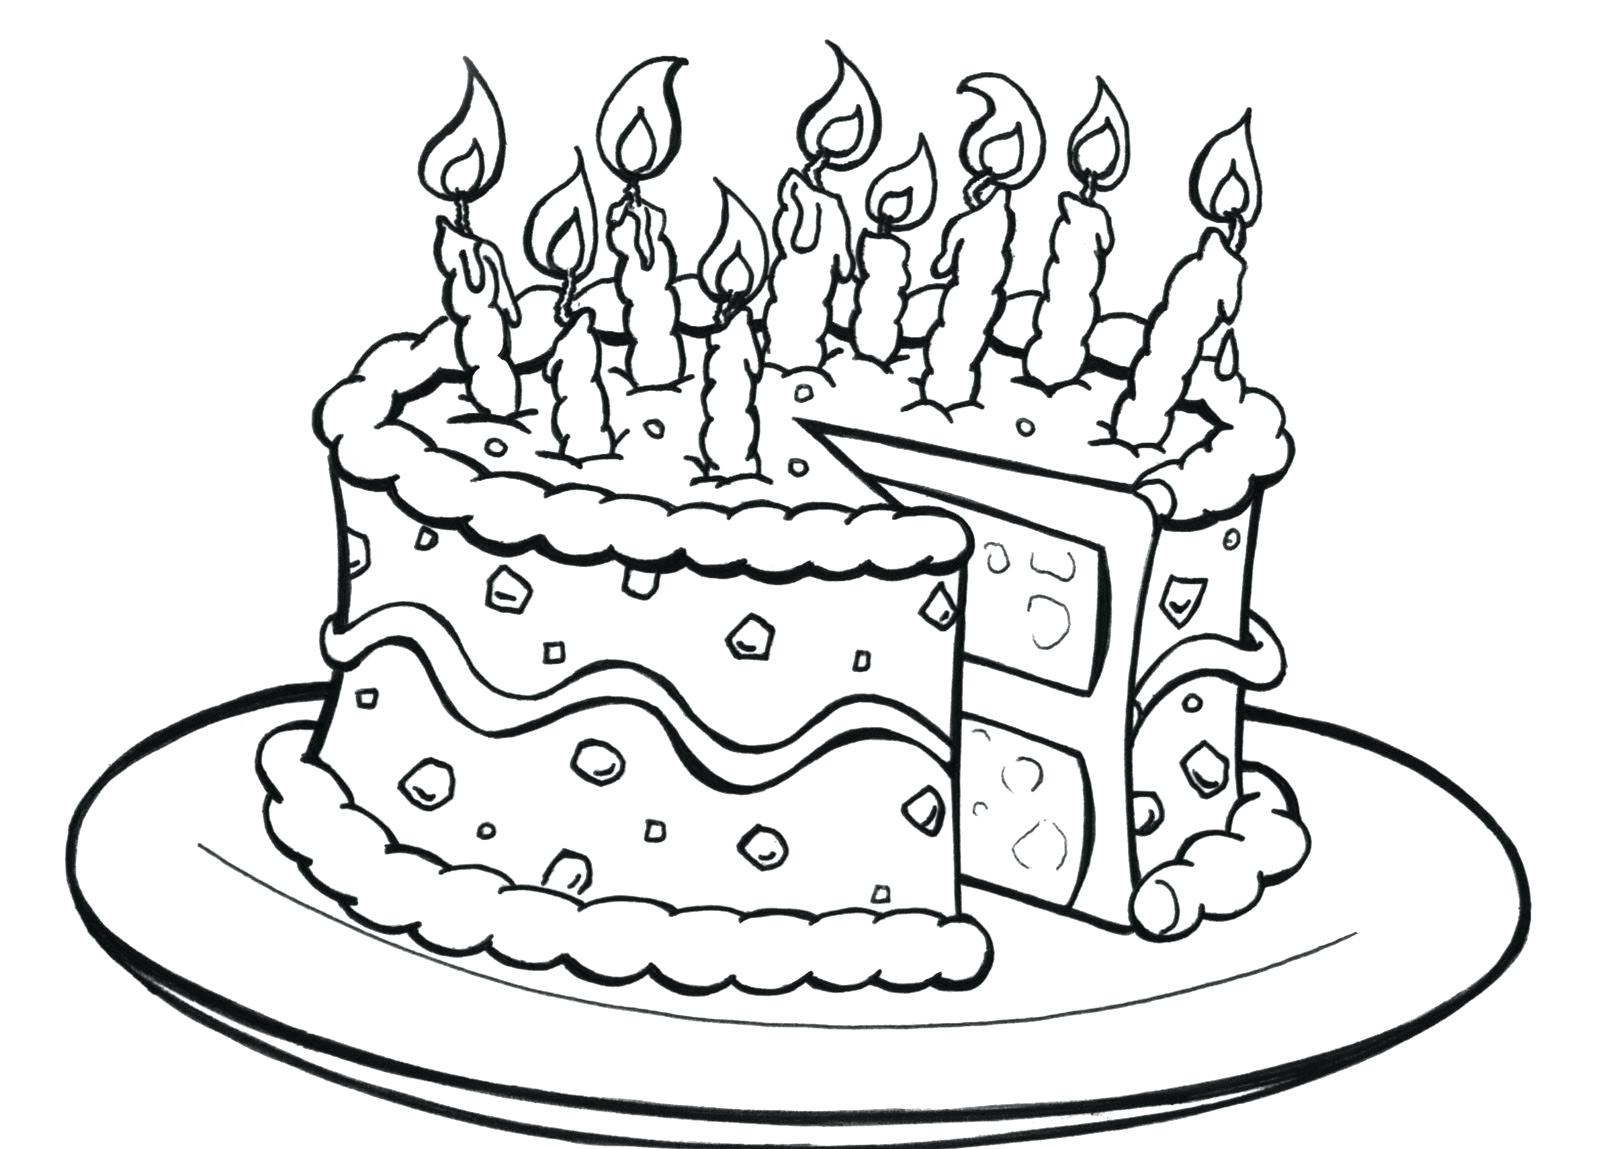 Chocolate Cake Coloring Page at GetDrawings | Free download